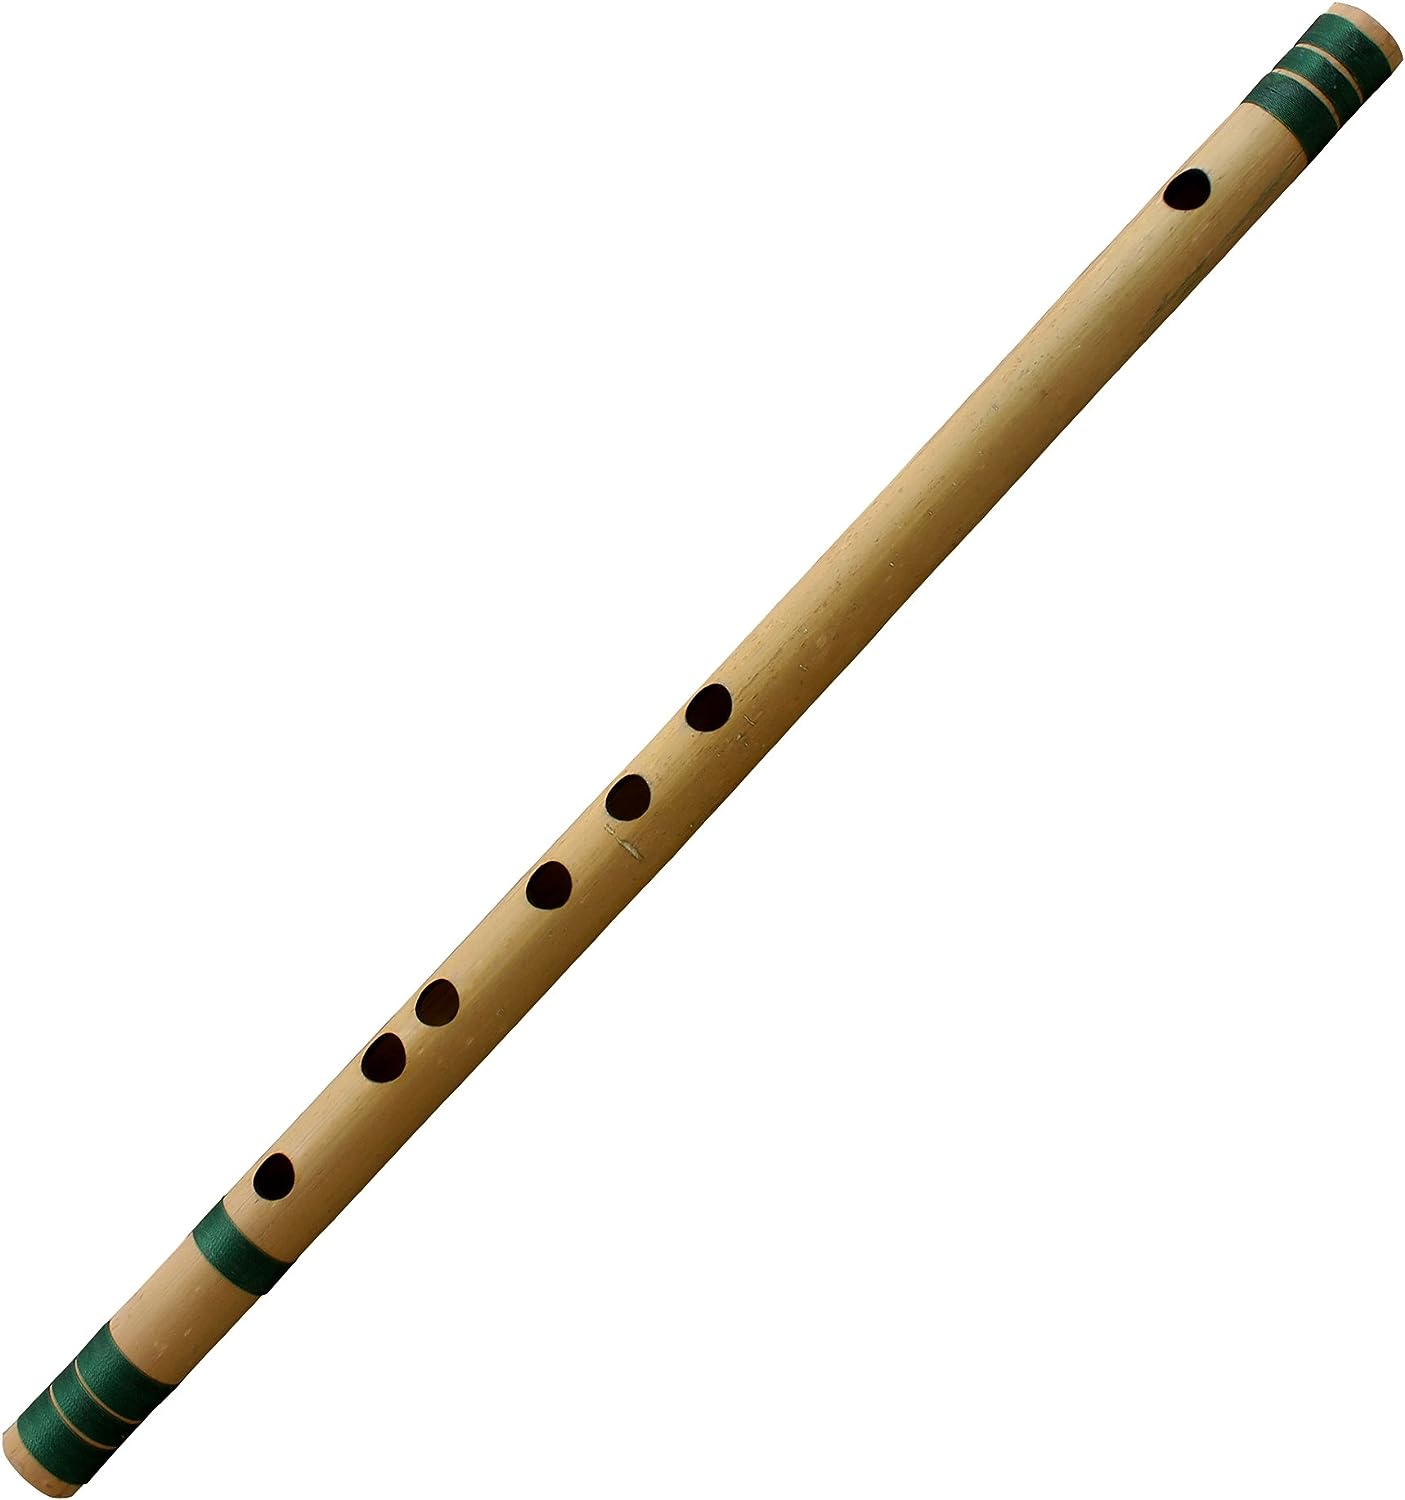 How to make professional bamboo flute